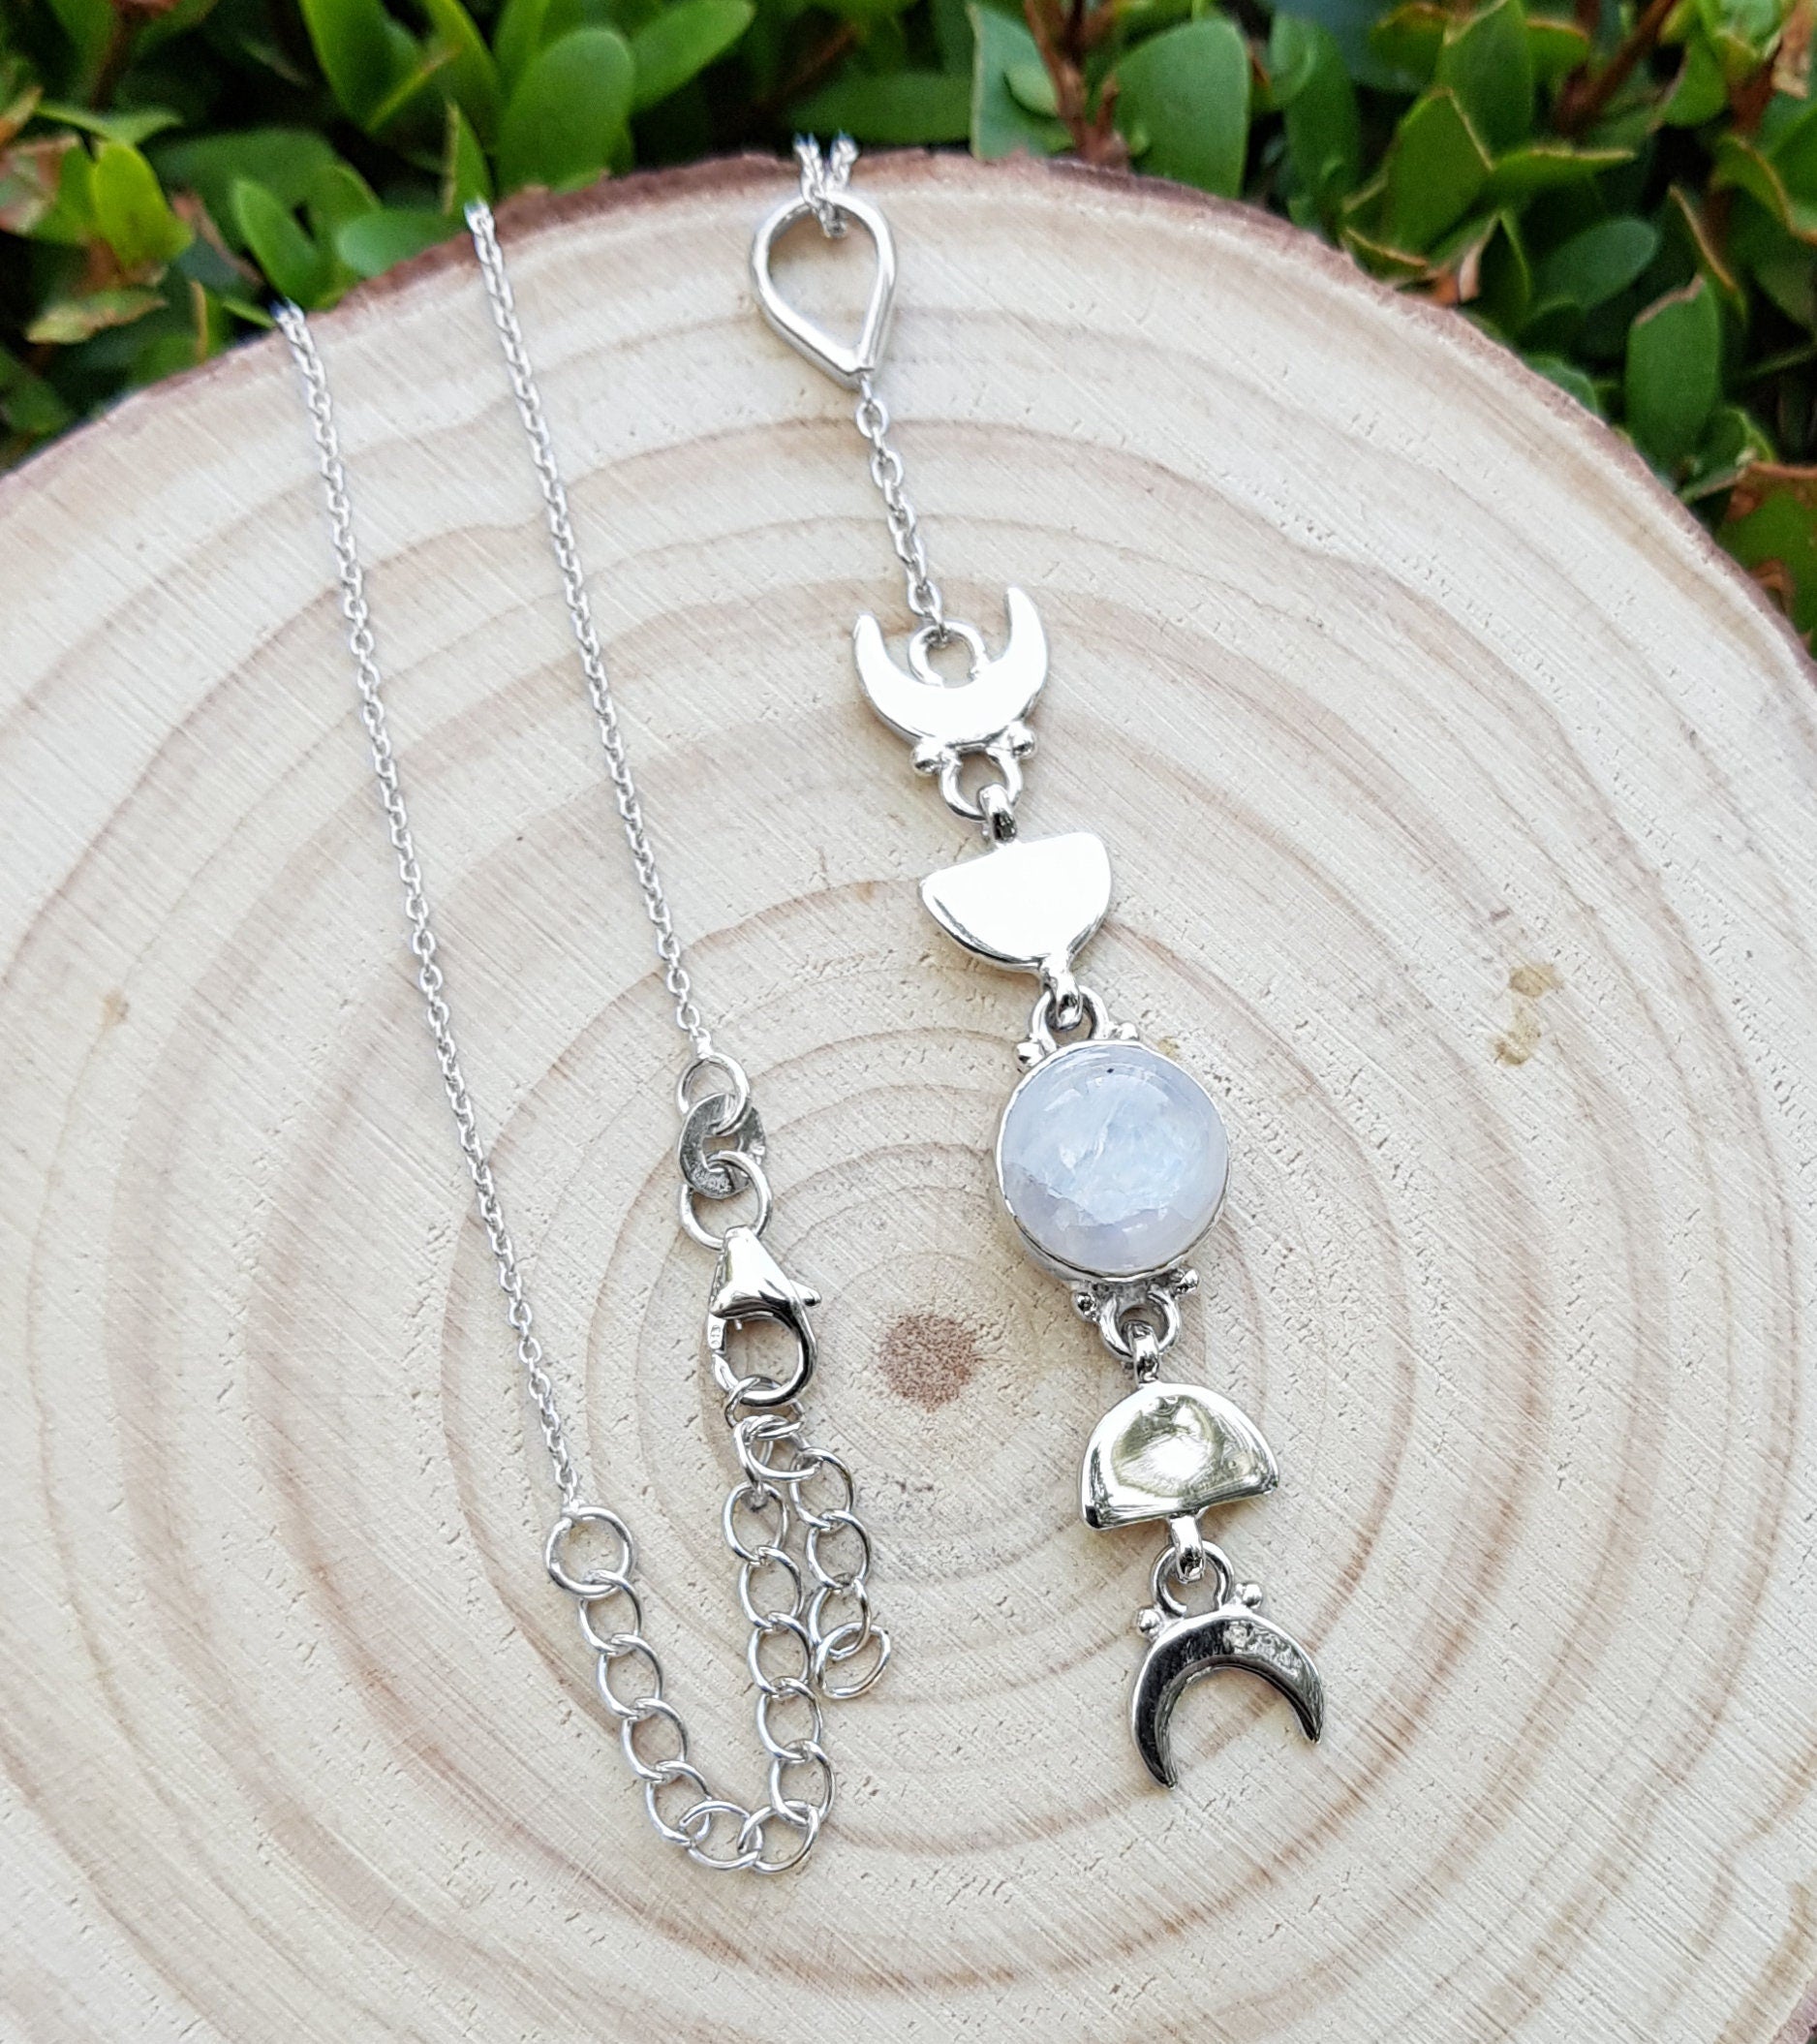 Boho Moonstone Necklace Moon Phases Necklace Sterling Silver Necklace With Chain Statement Necklace Bridesmaid Necklace